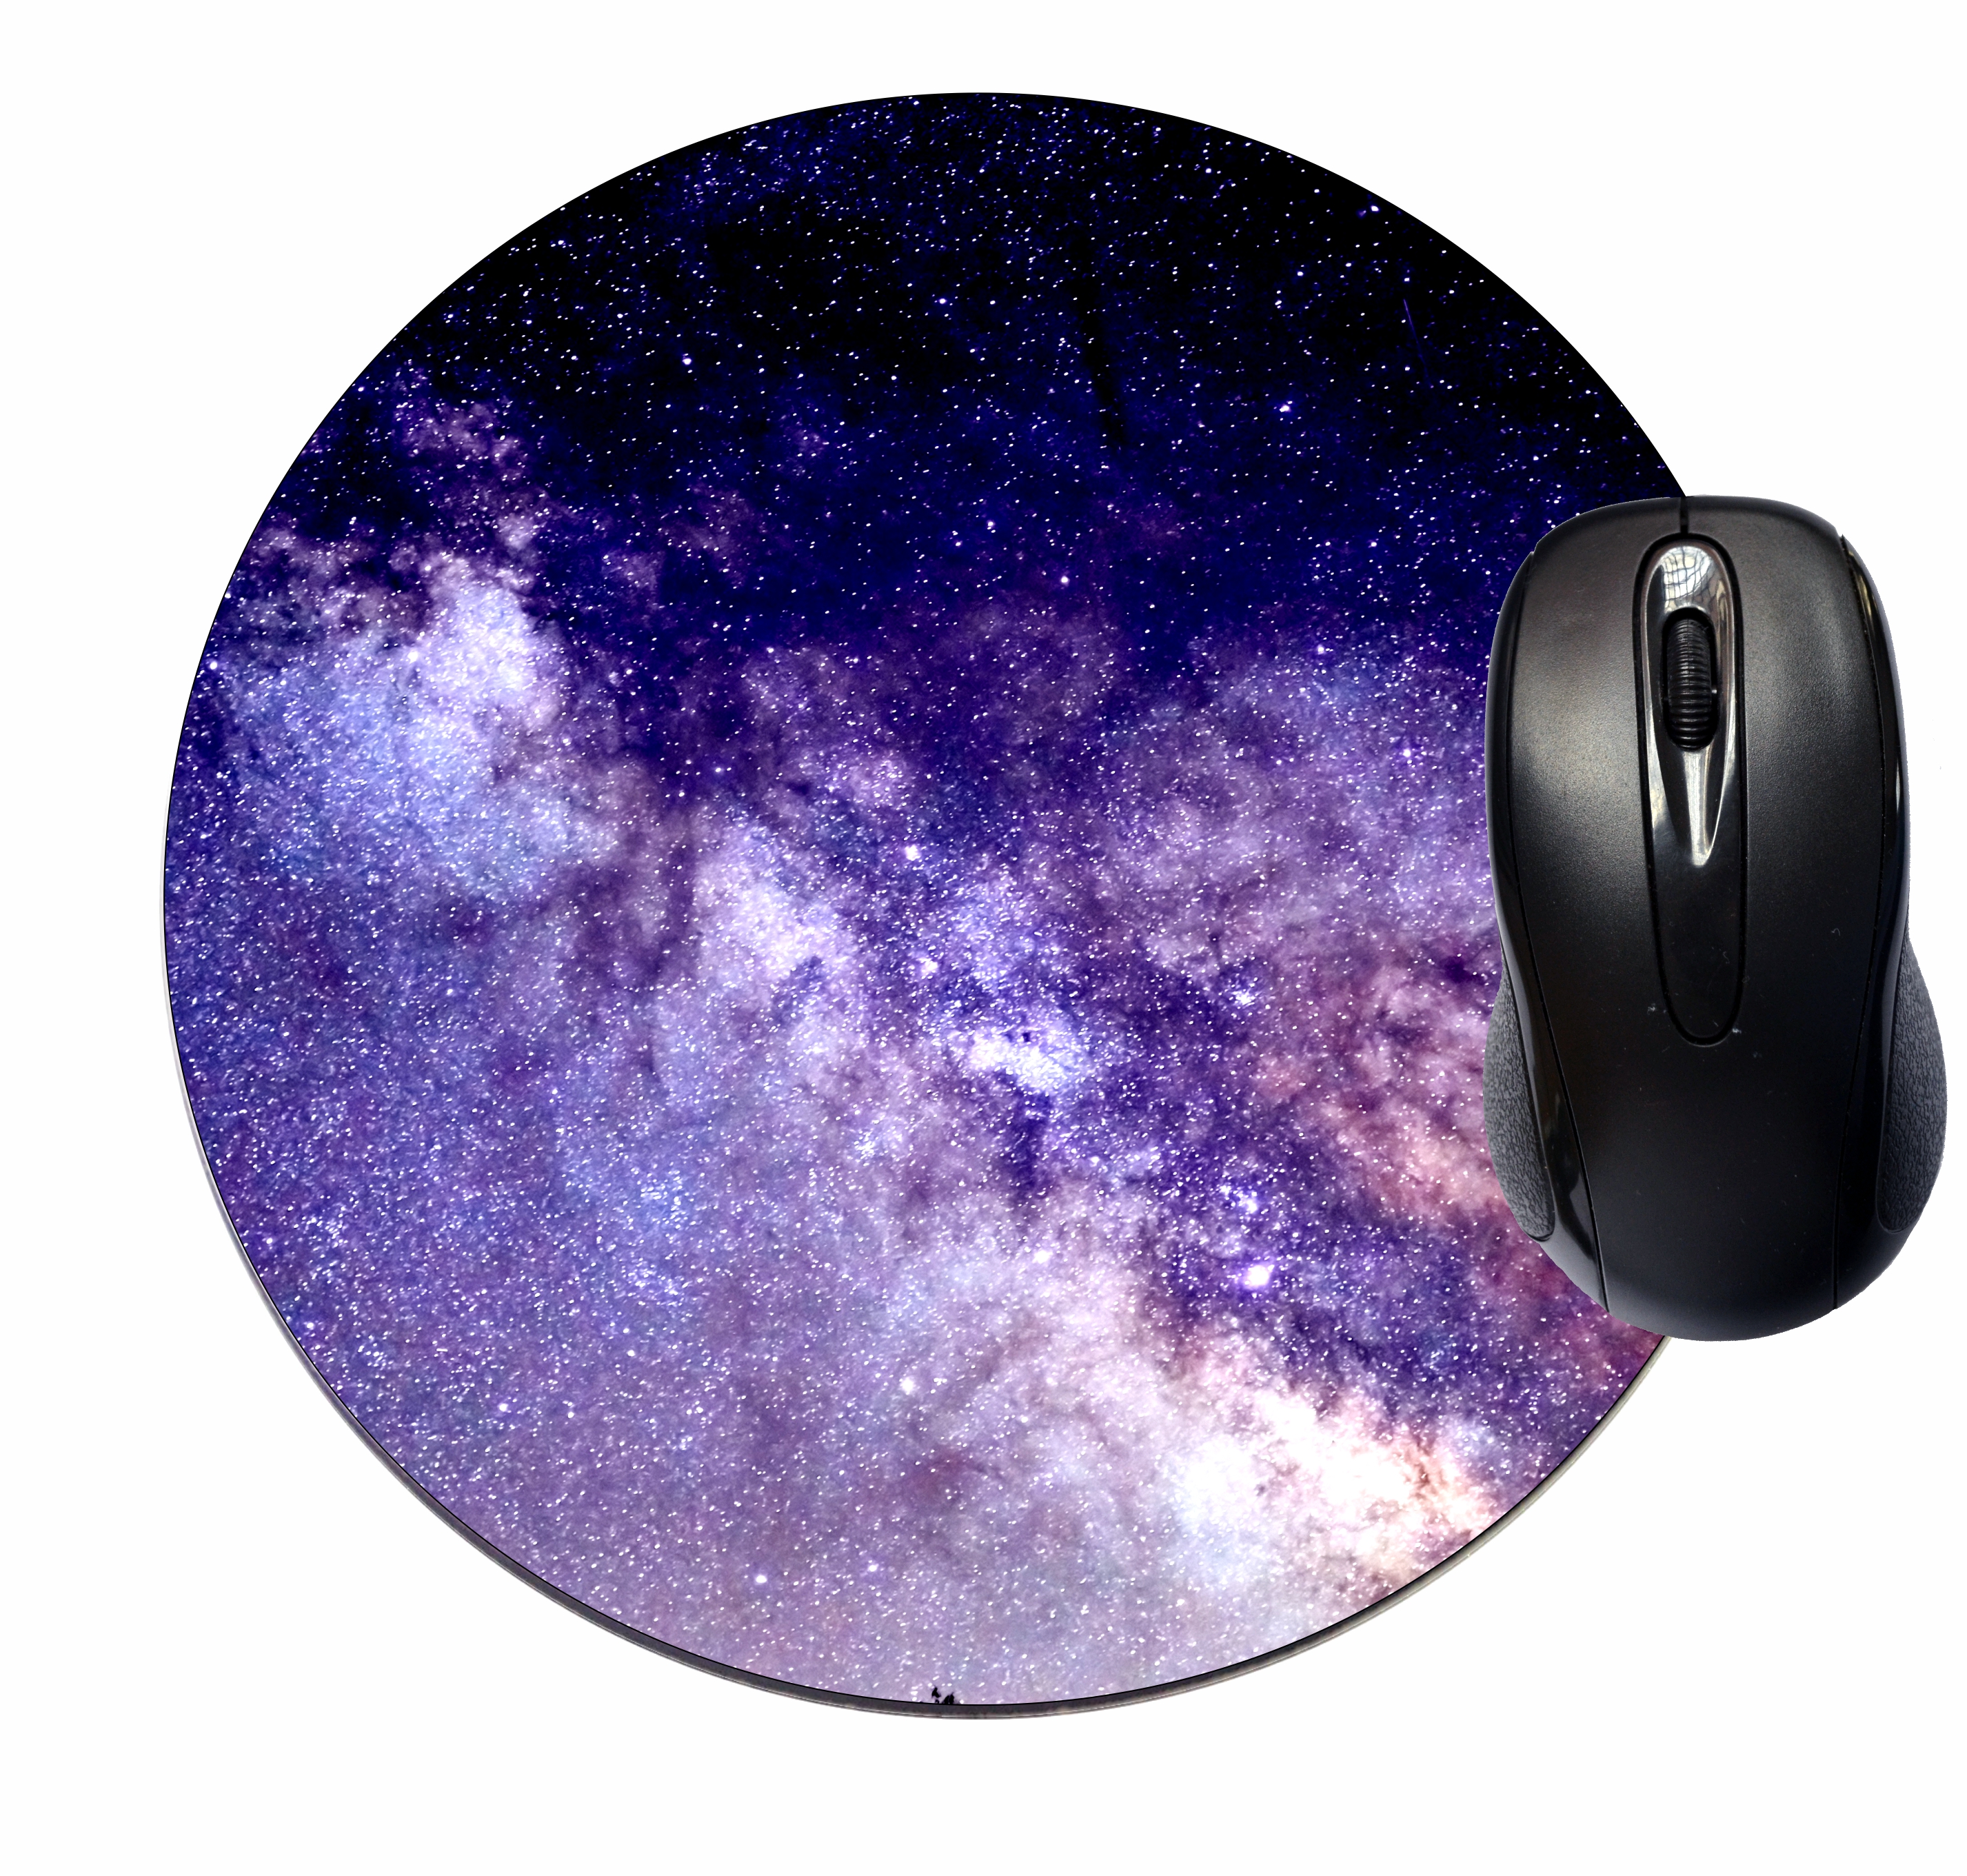 Mouse Mat Pad - Mousepad Cute Desk Round Circle Mousemat - Mouse Pad Galaxy - Purple Space - image 1 of 1